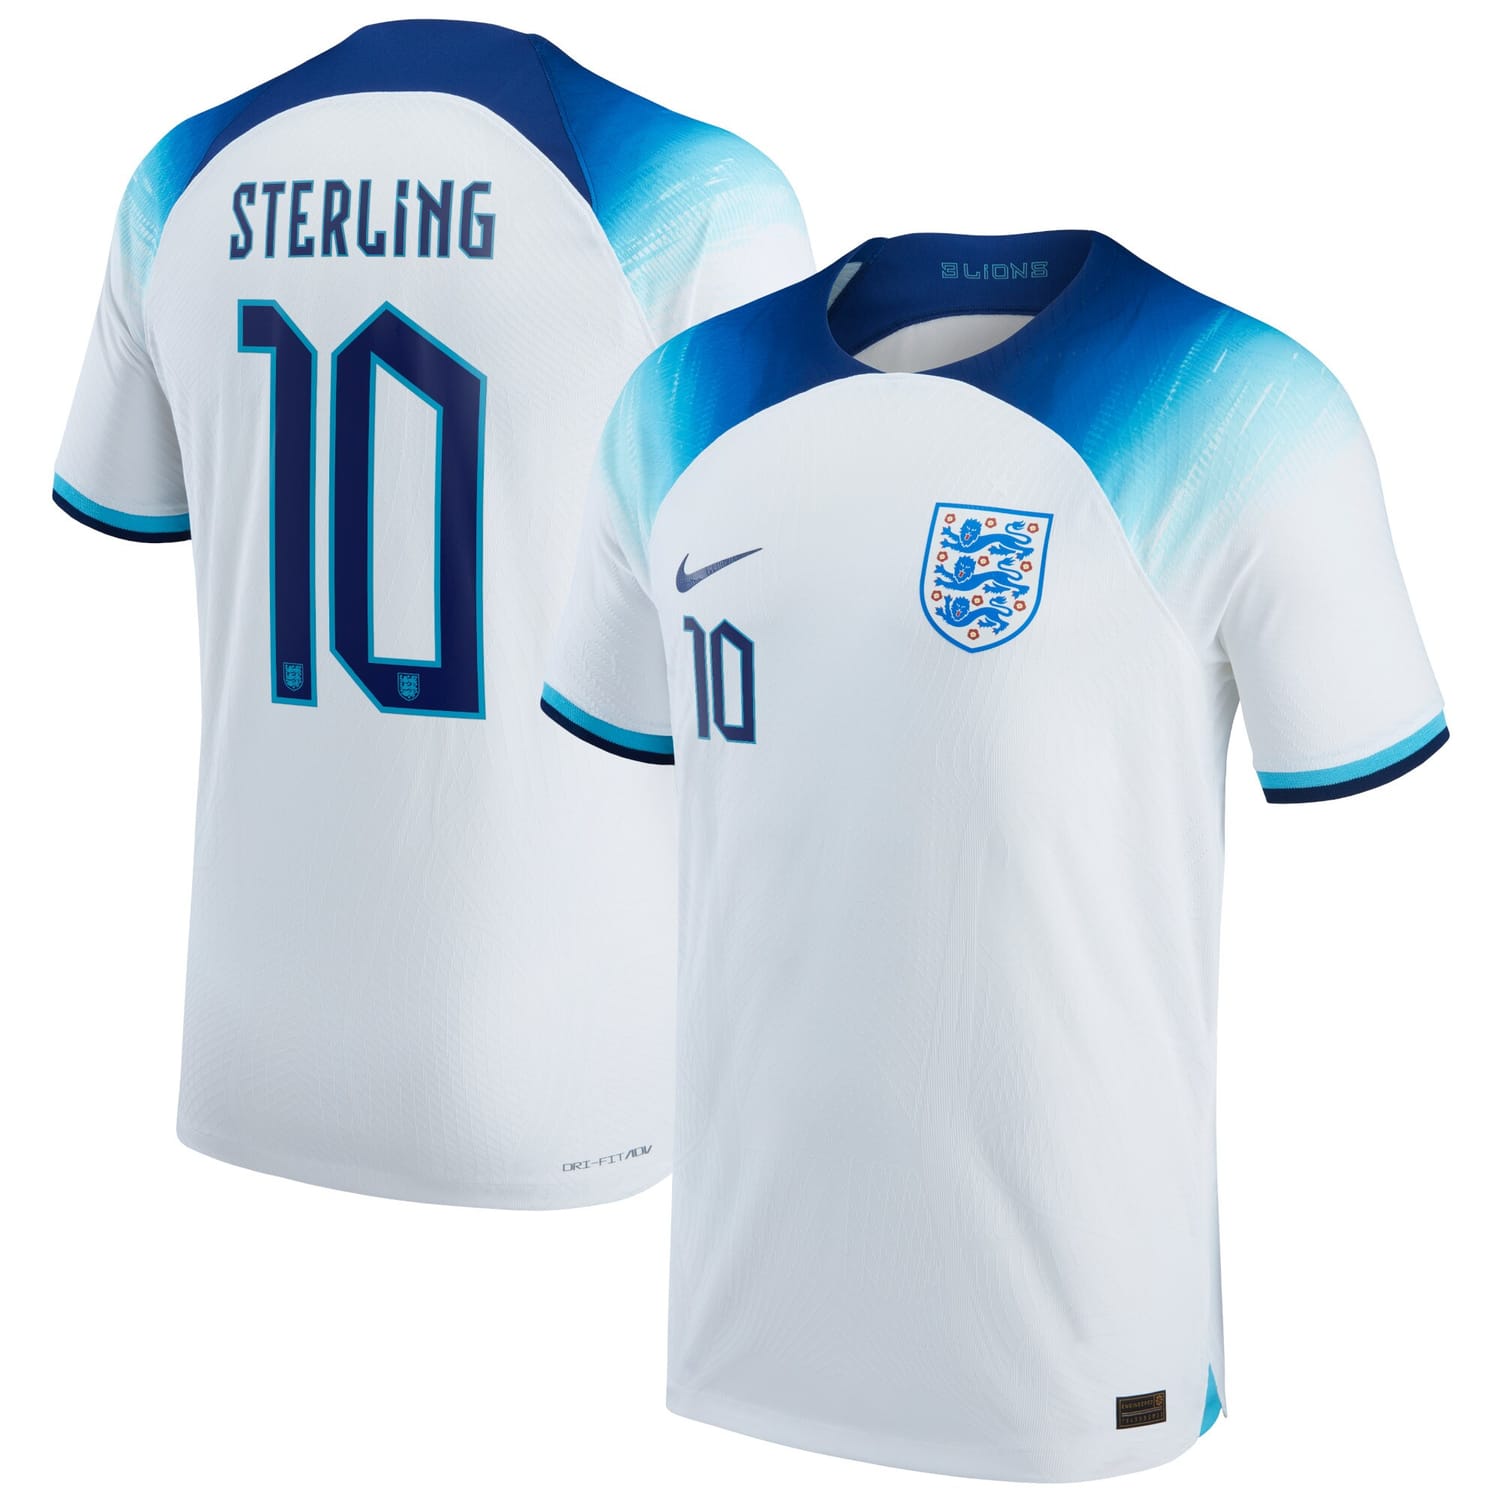 England National Team Home Authentic Jersey Shirt 2022 player Raheem Sterling 10 printing for Men